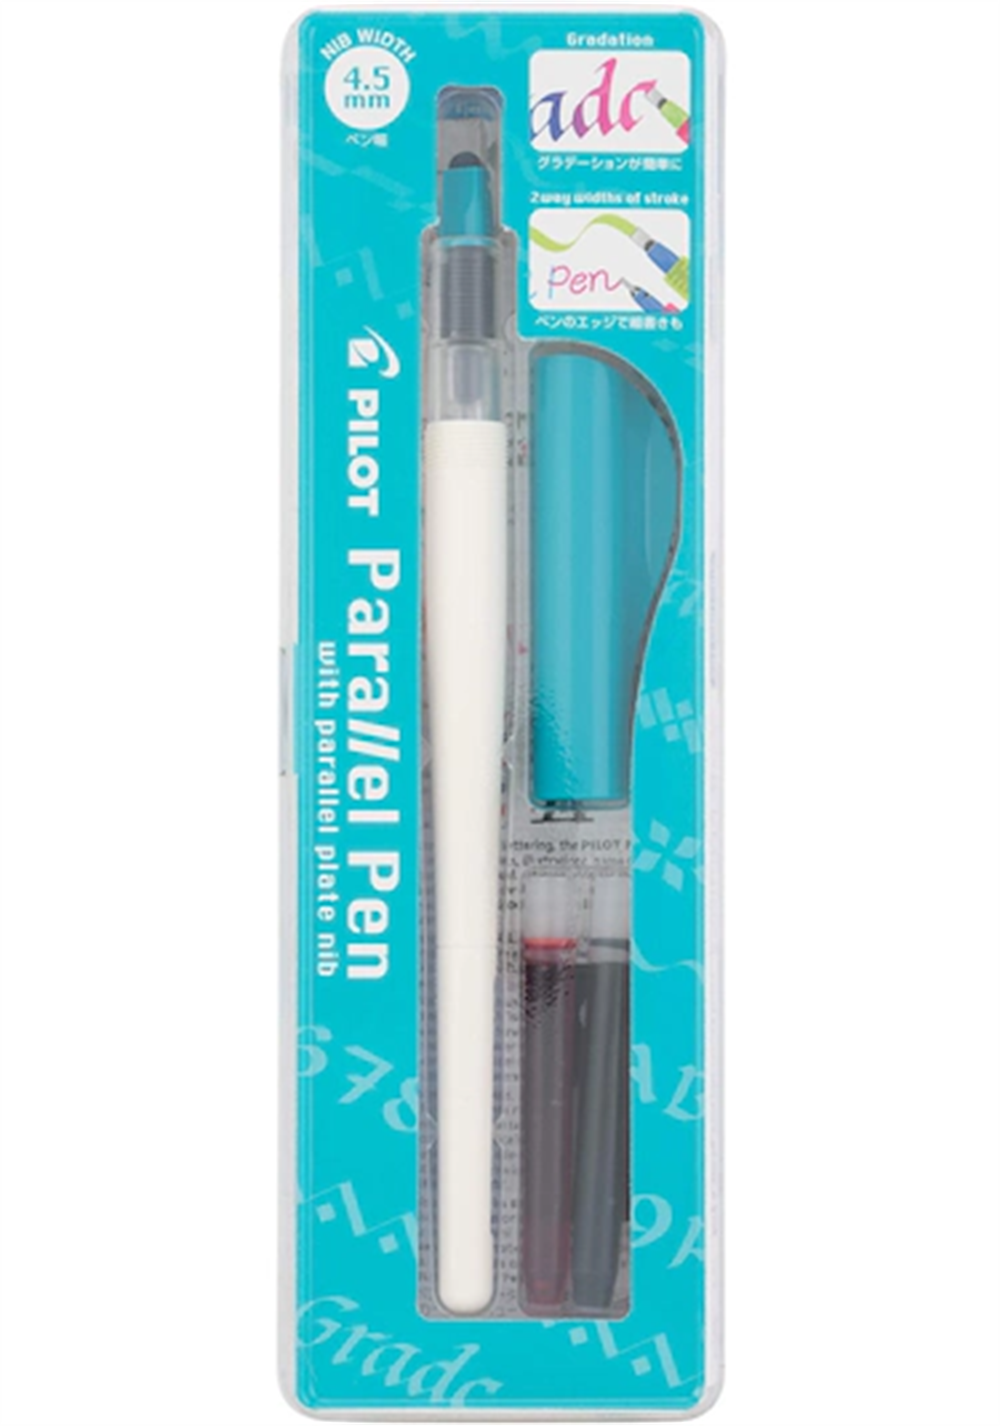 Pilot Parallel Calligraphy Pen 4.5mm Turquoise